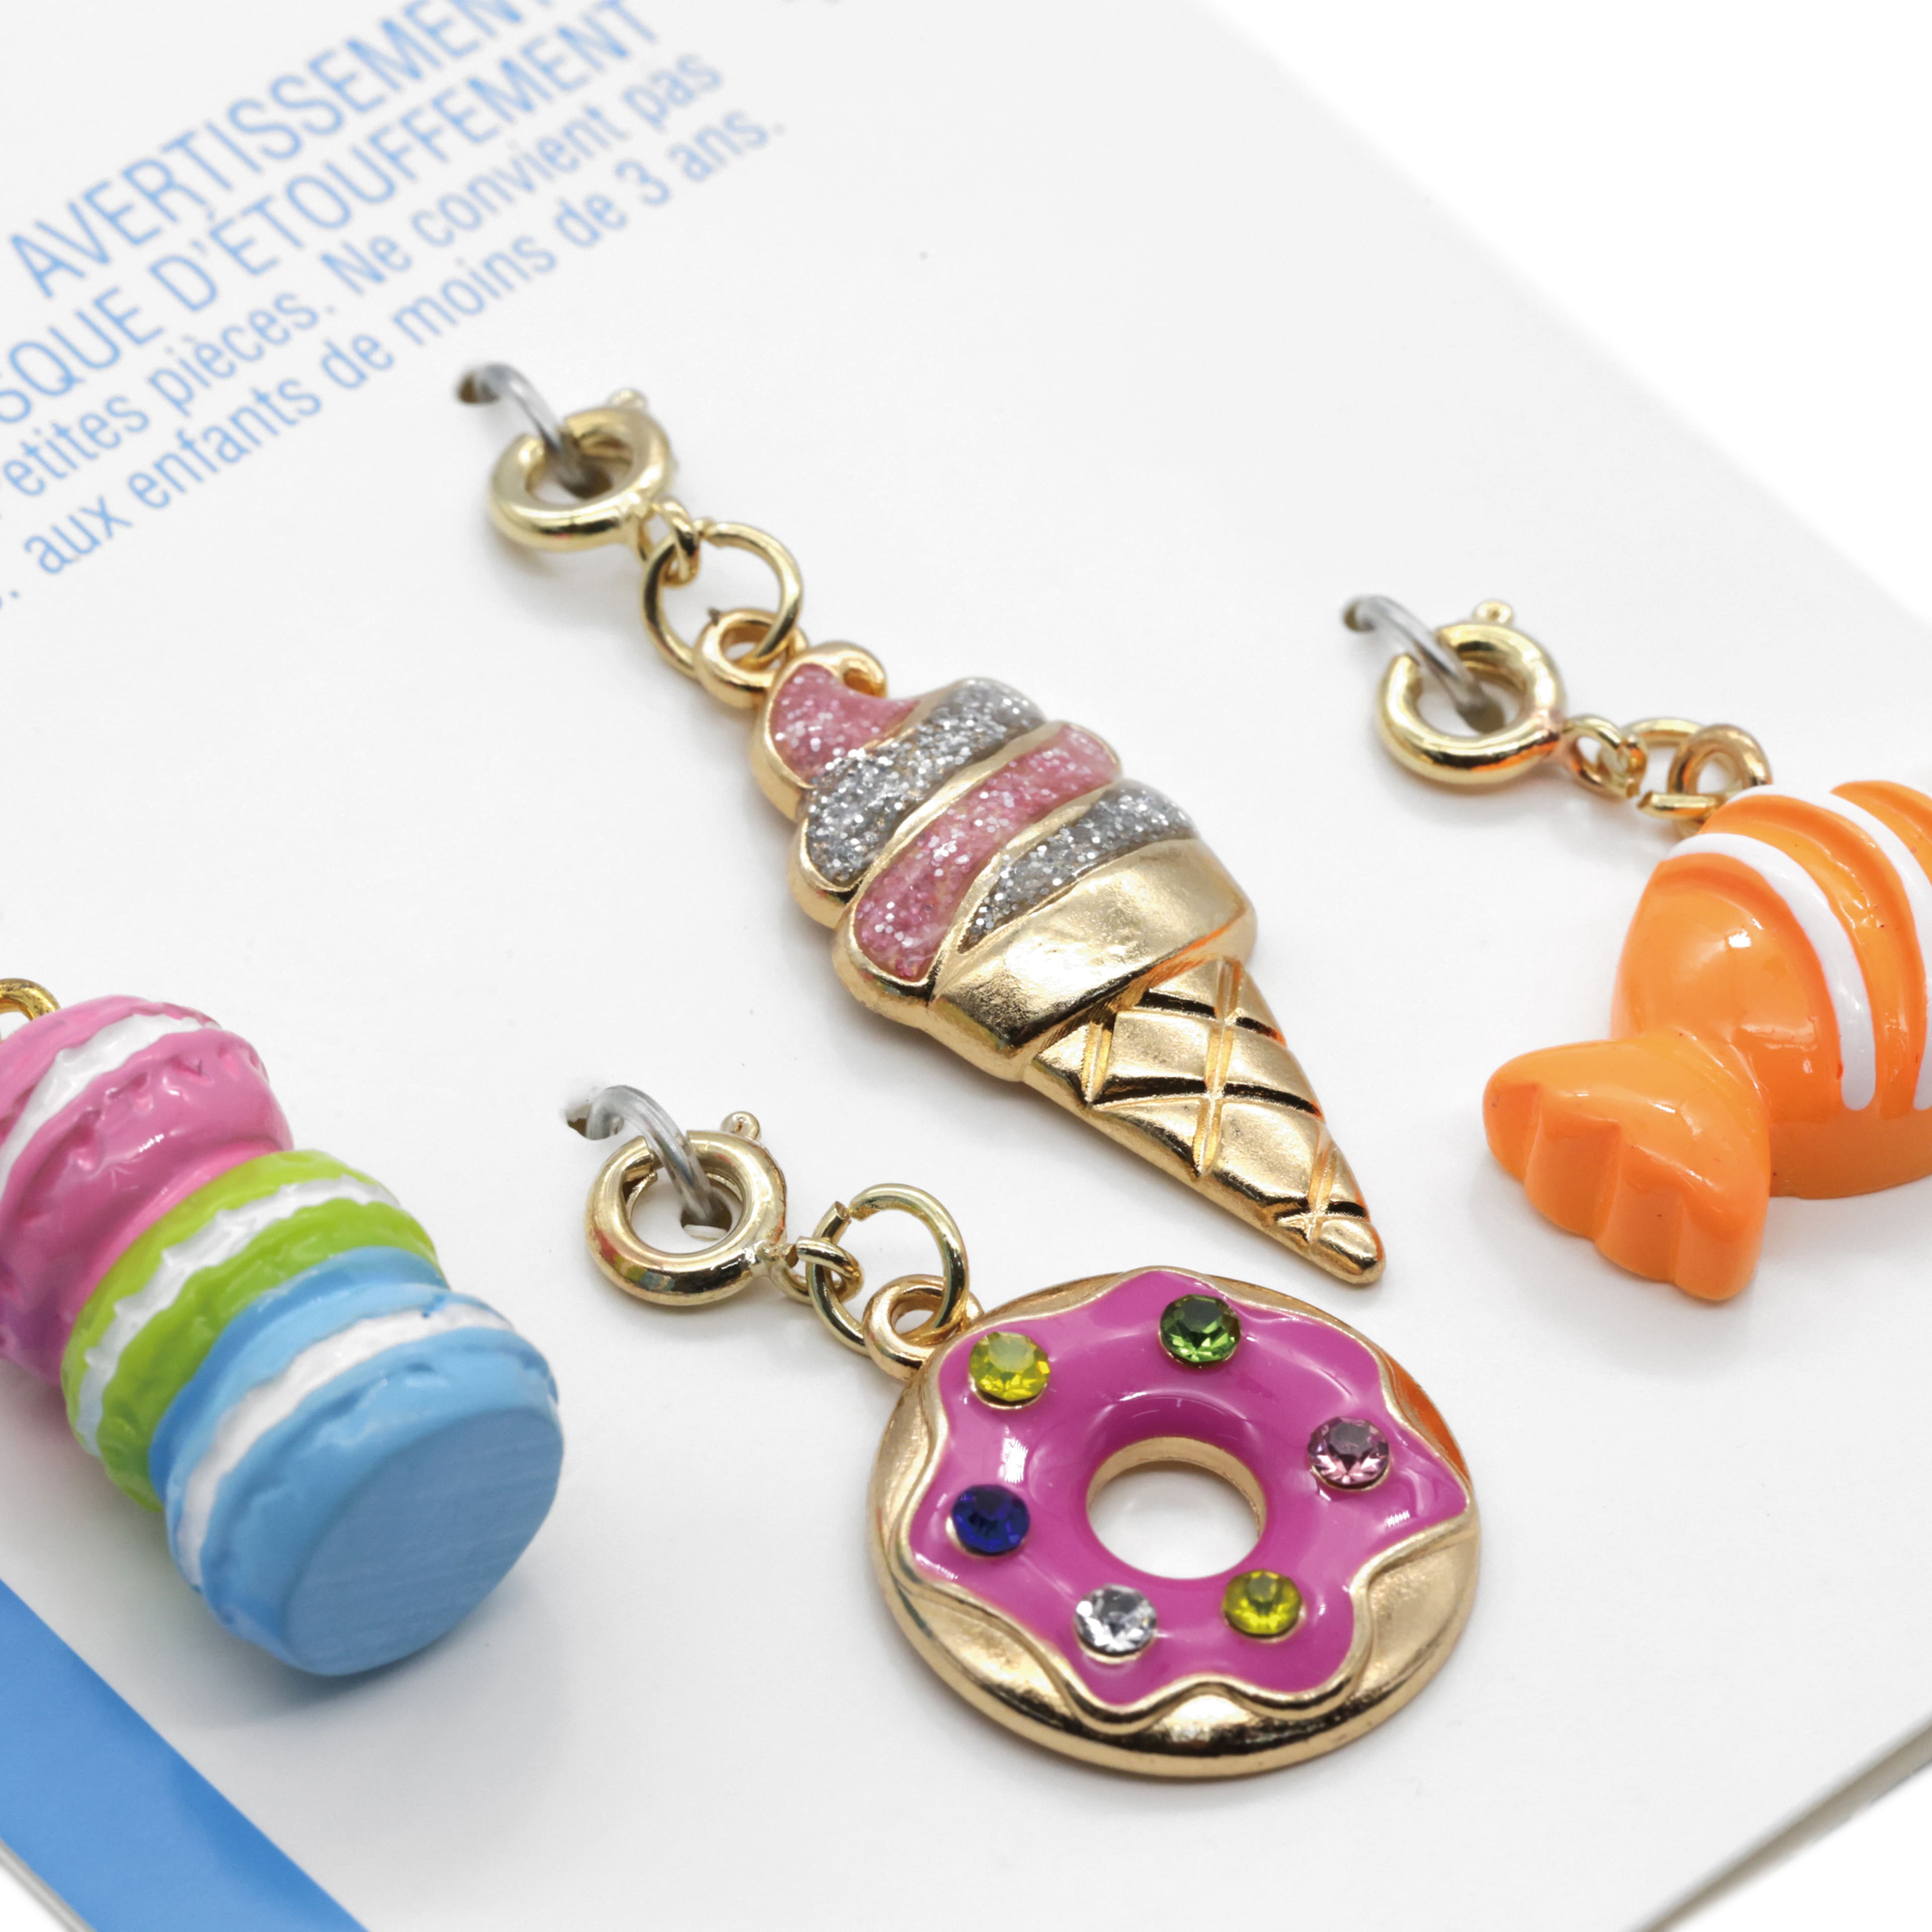 12 Packs: 4 ct. (48 total) Sweet Treat Charms by Creatology&#x2122;